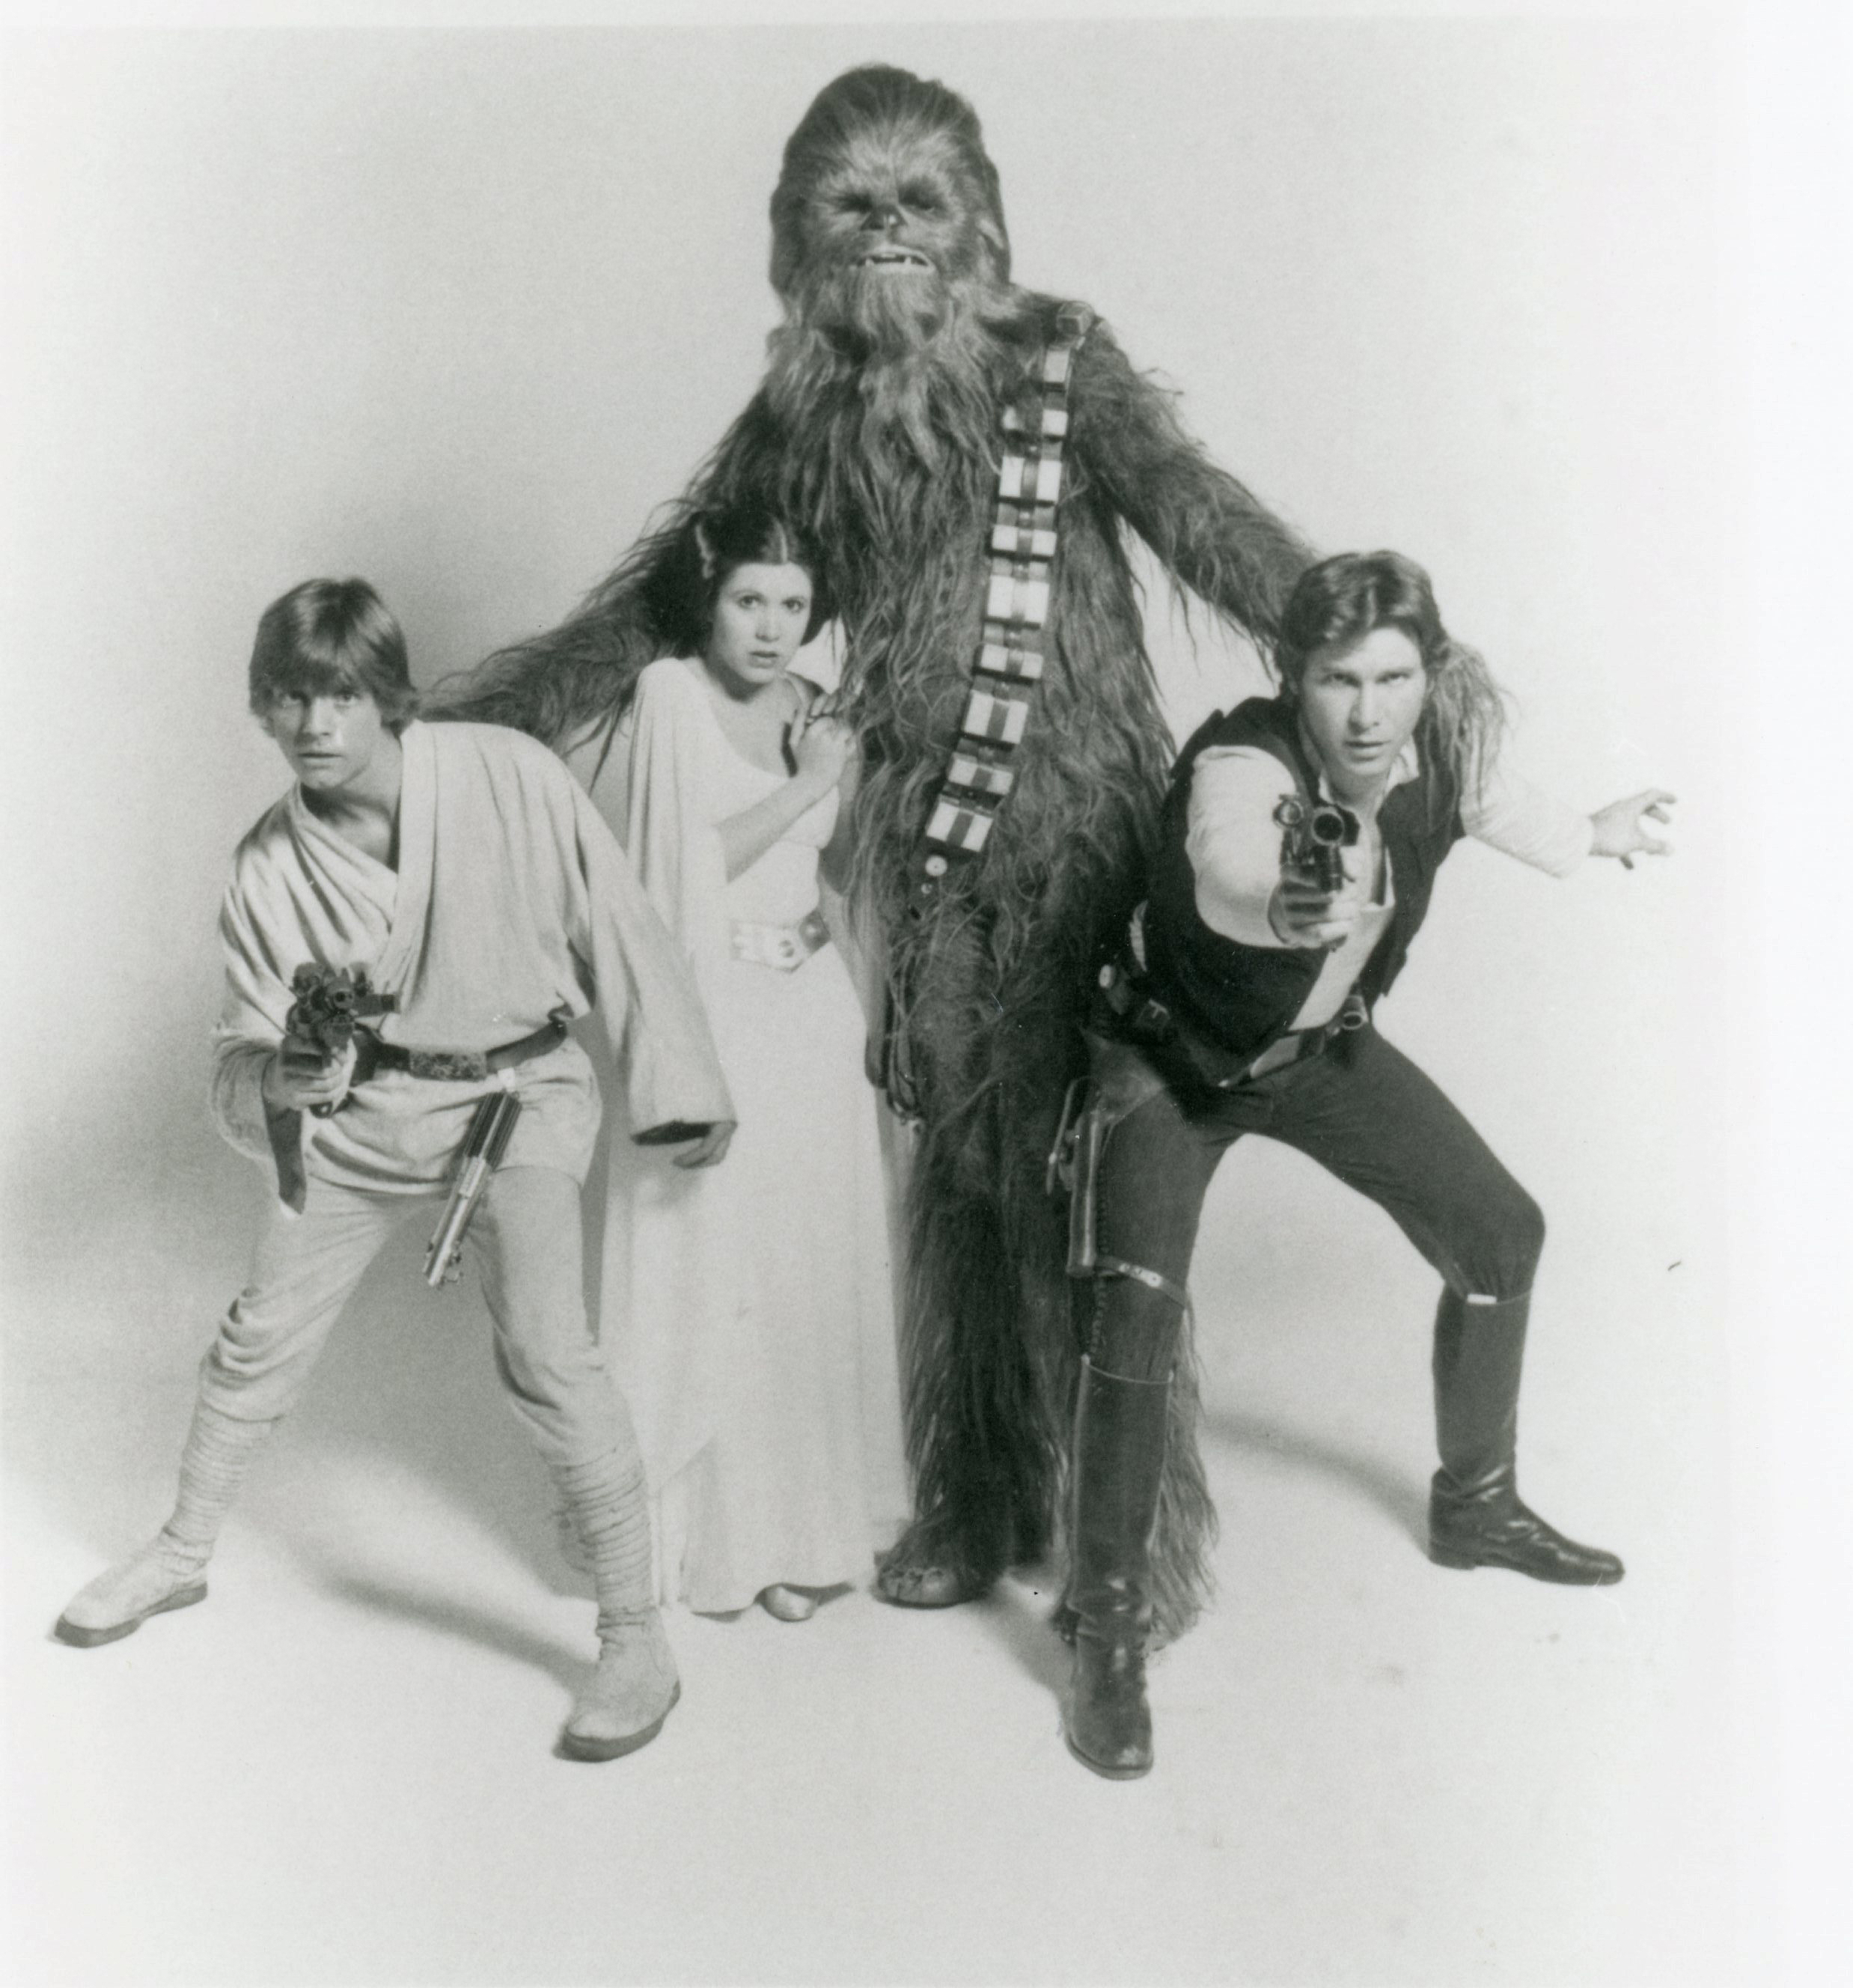 Star Wars: A New Hope Photo: File